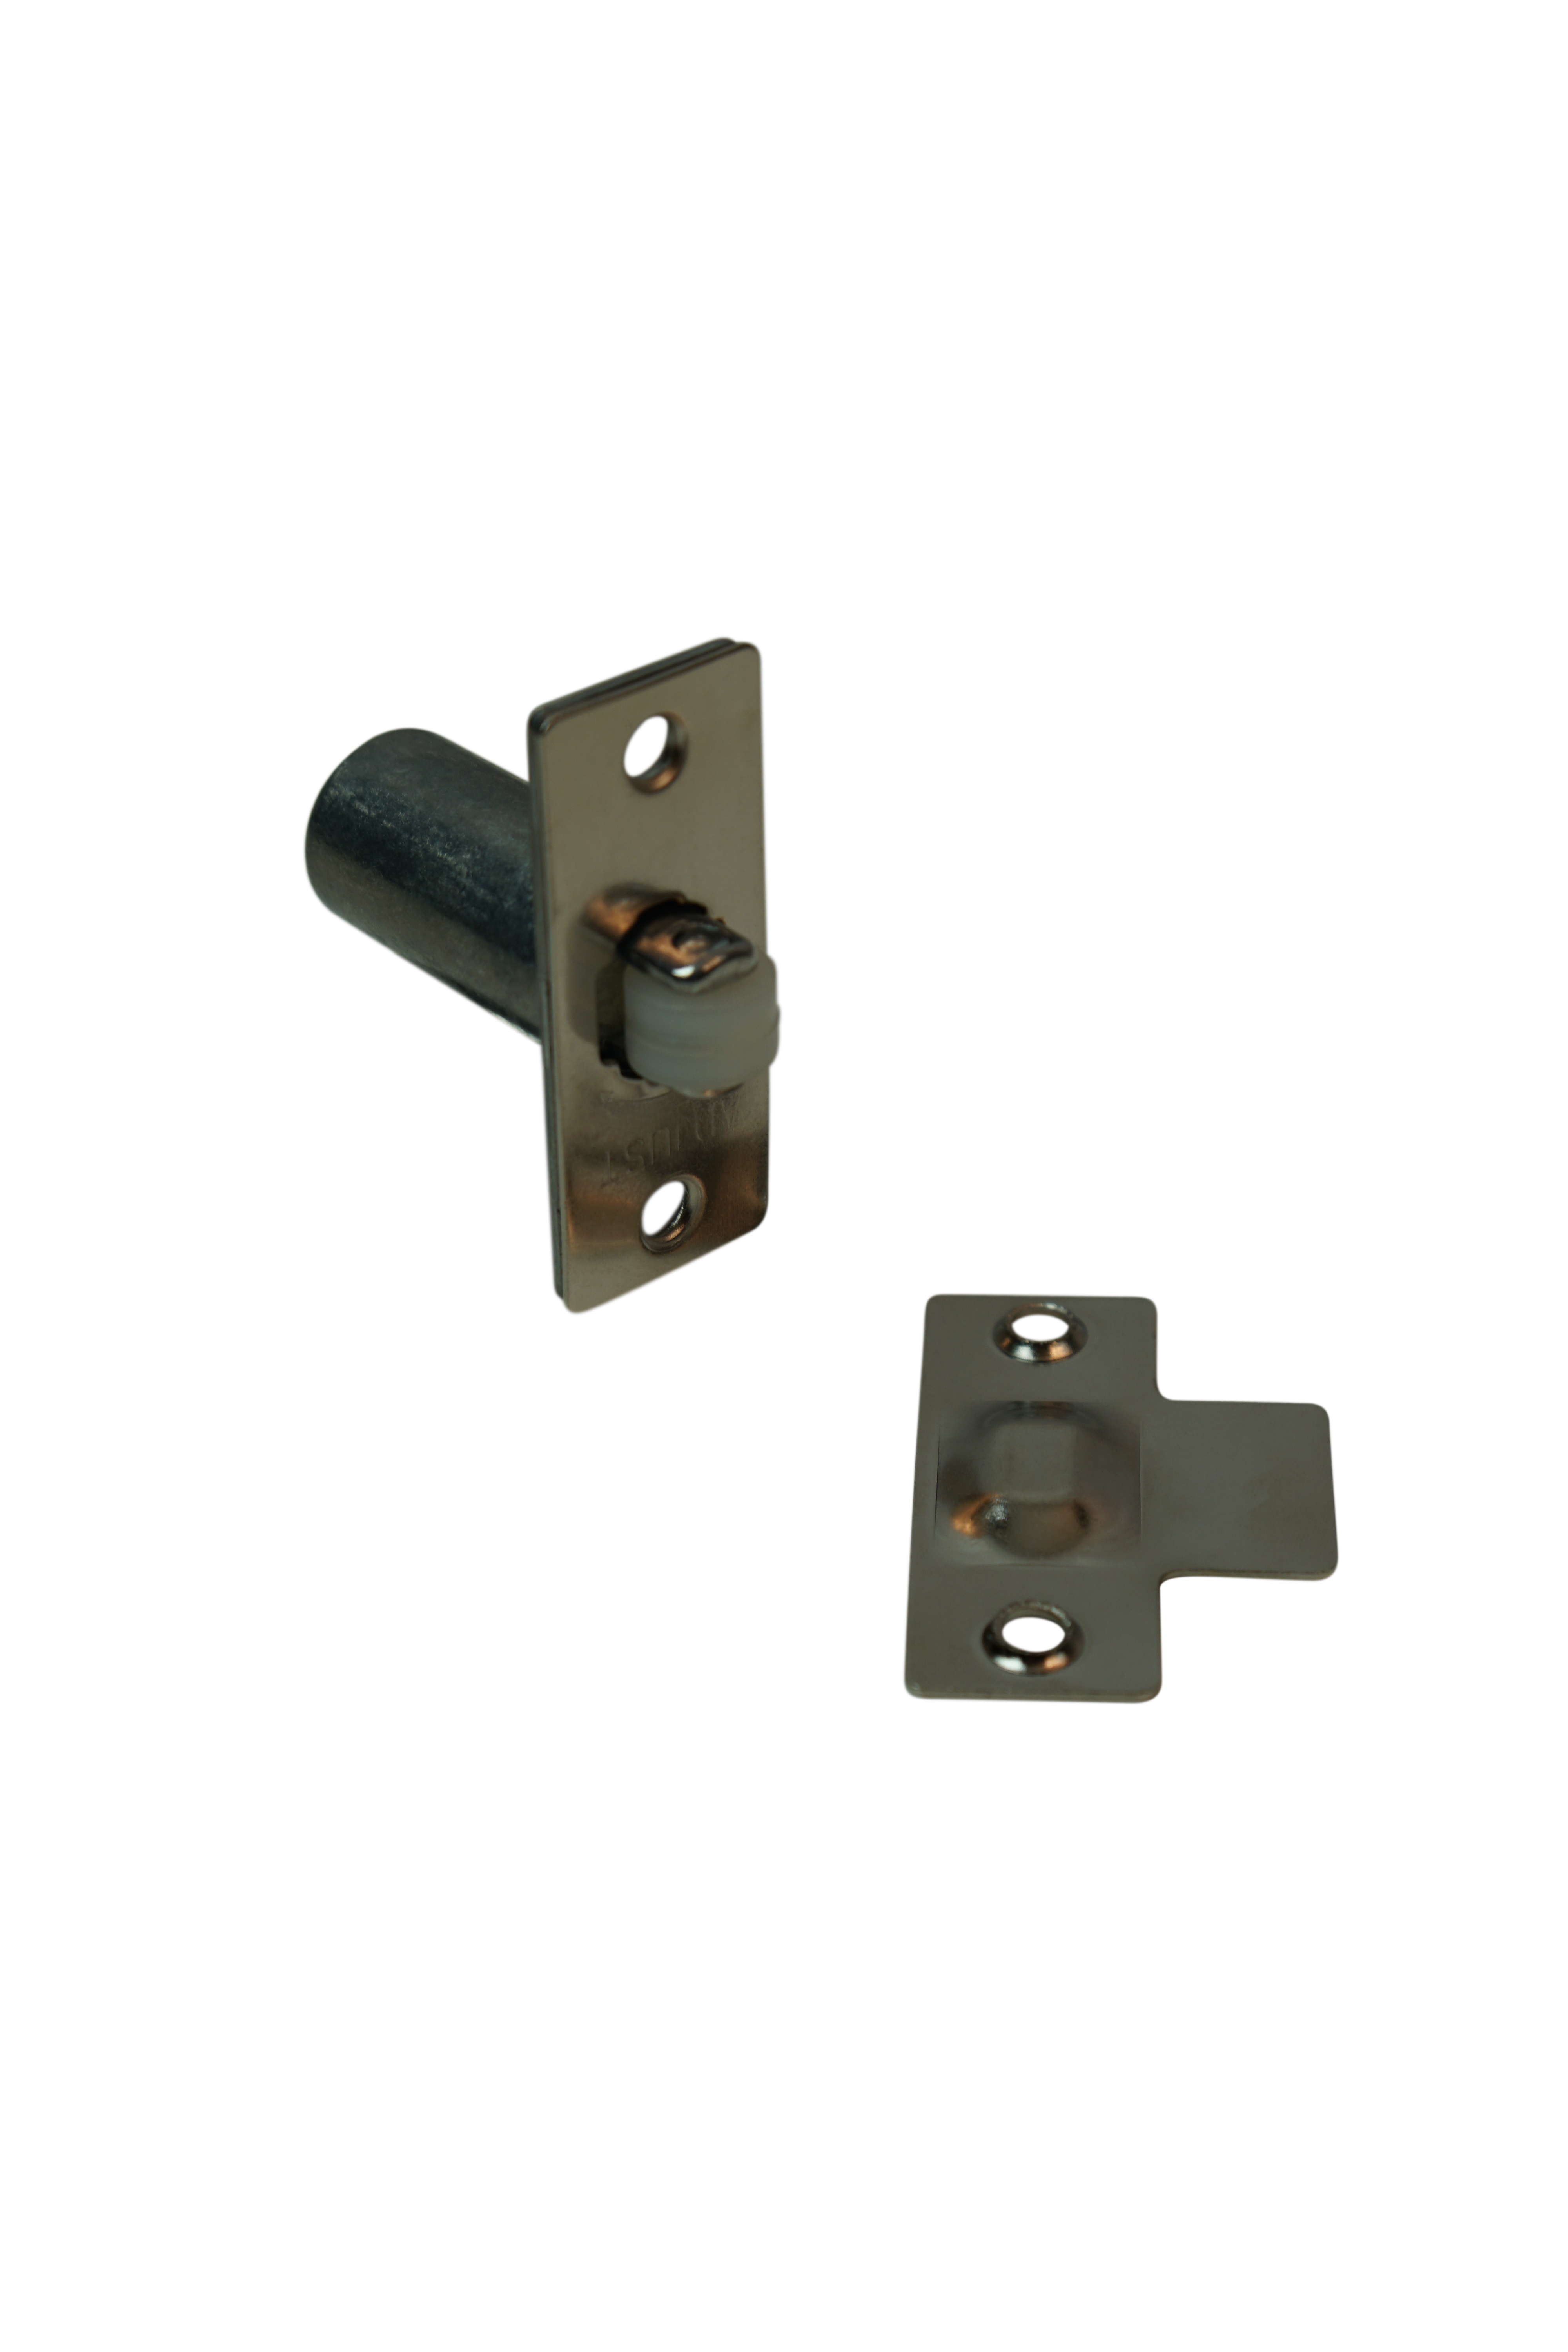 Nickel Plated Contract Adjustable Roller Catch